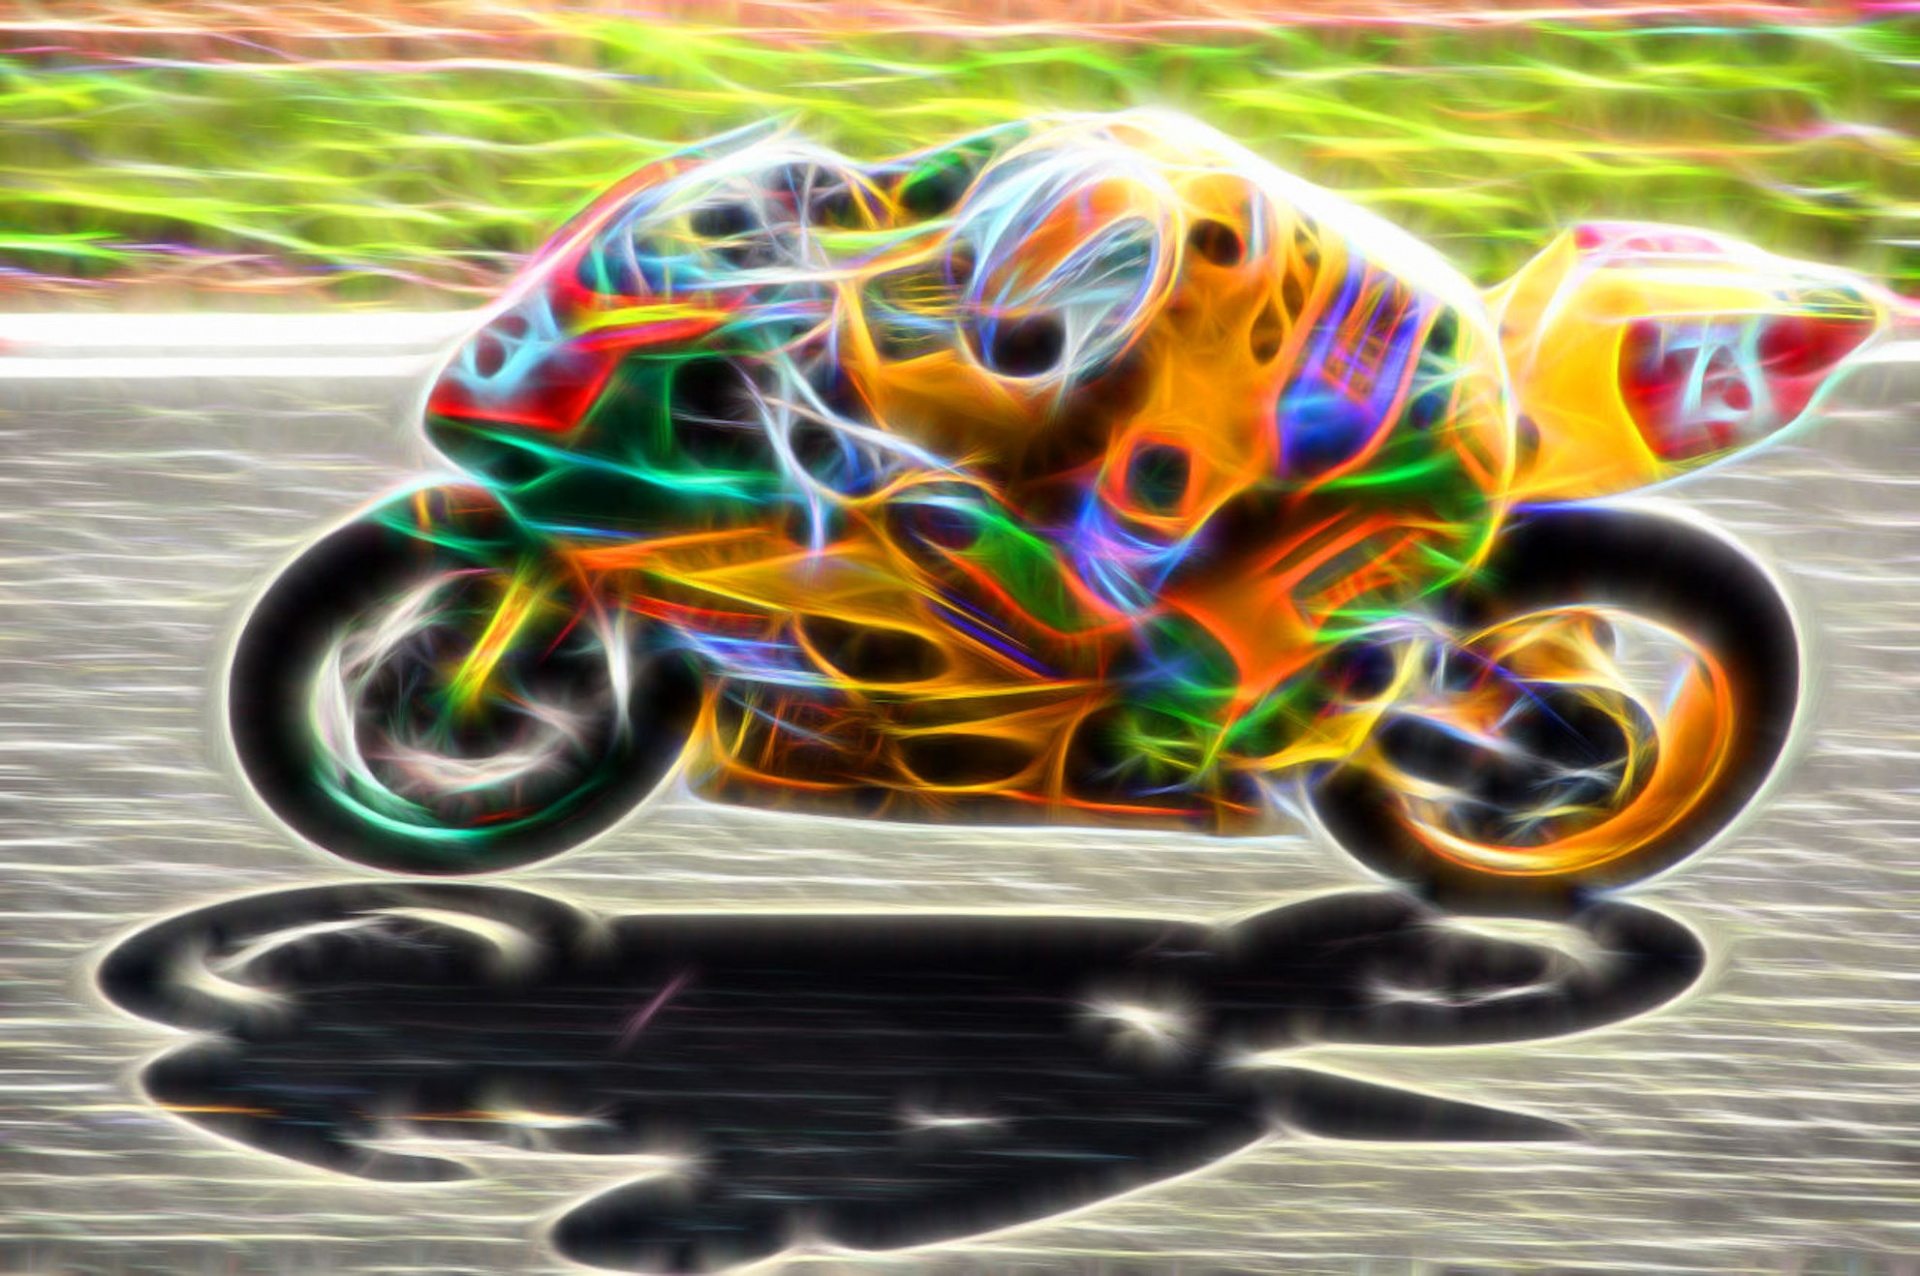 motorcycle neon graphic free photo